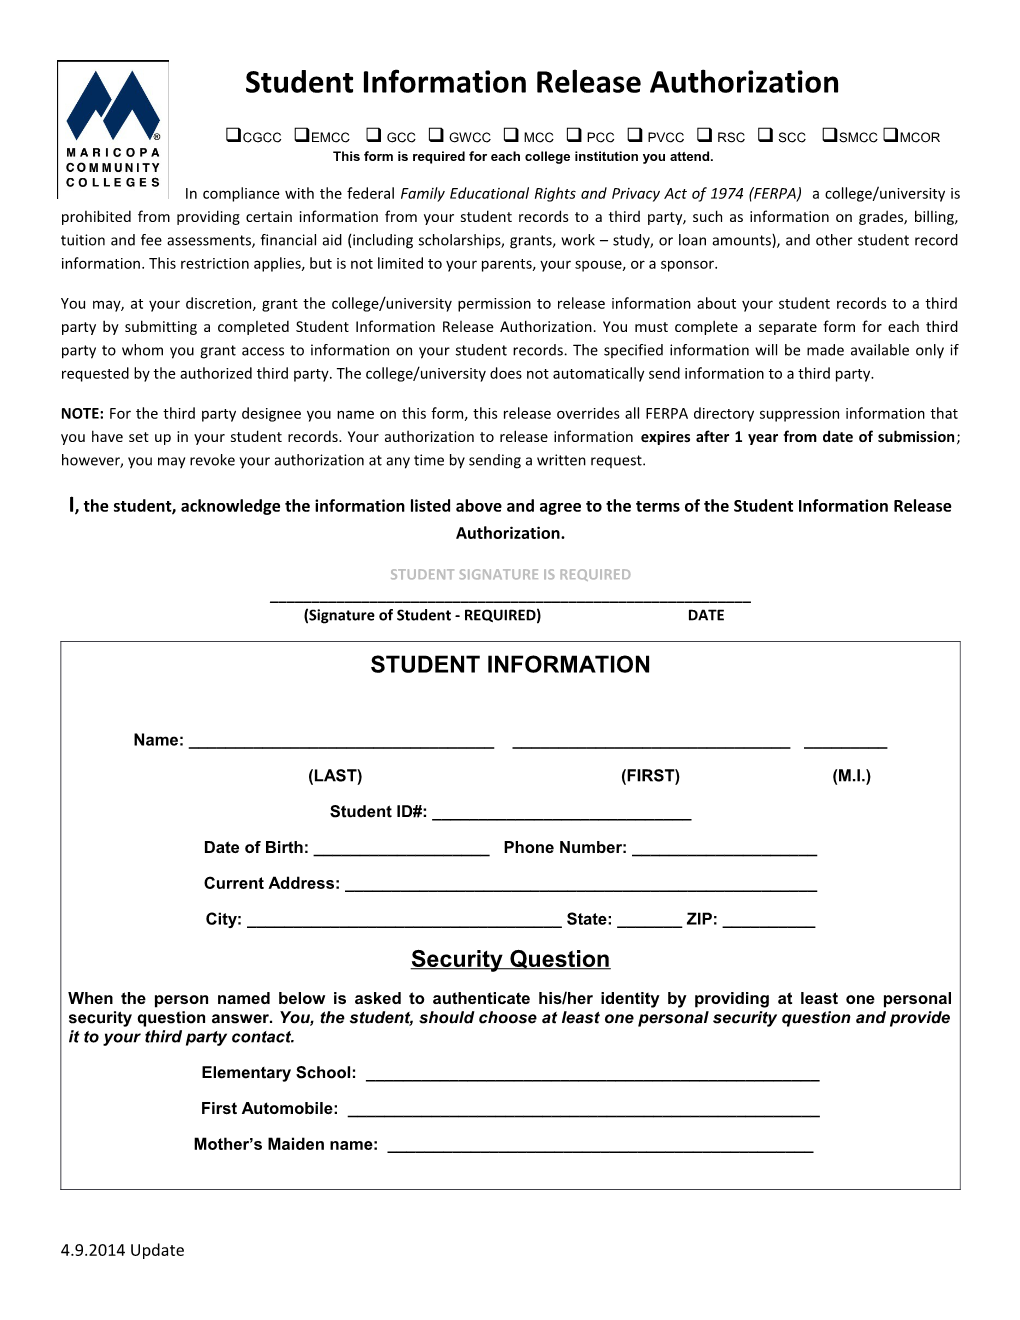 Student Information Release Authorization